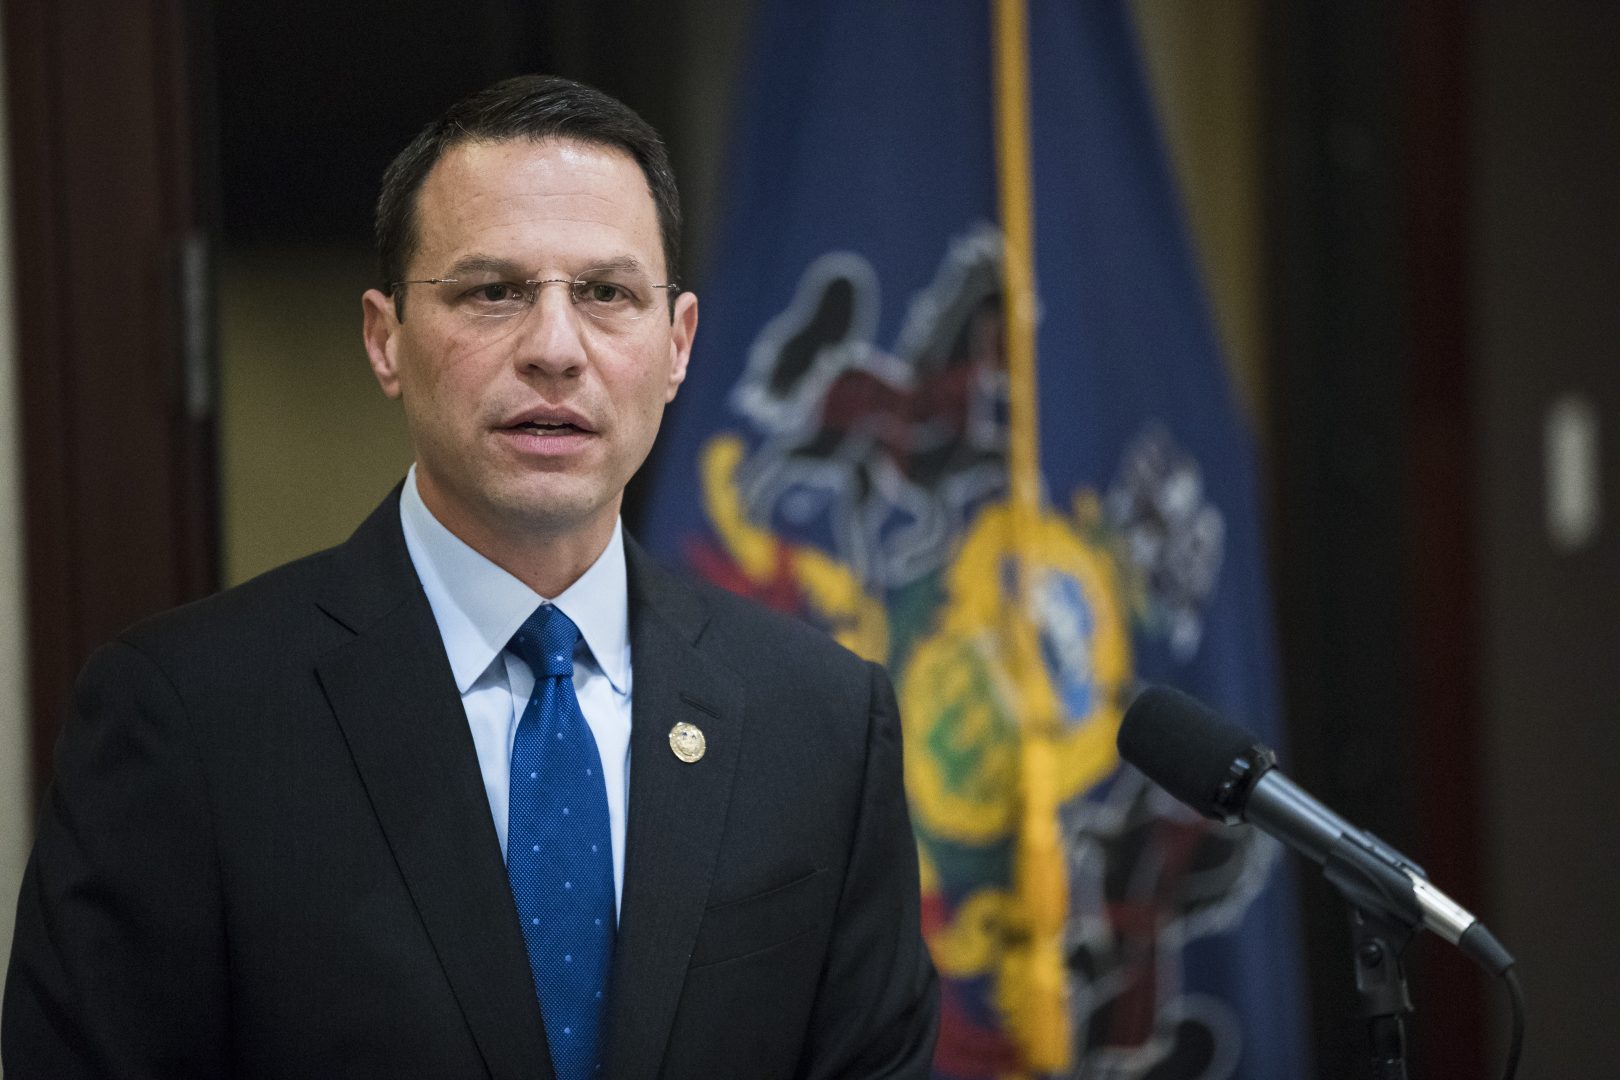 Pennsylvania Attorney General Josh Shapiro speaks during a news conference in Philadelphia, Tuesday, May 14, 2019. 